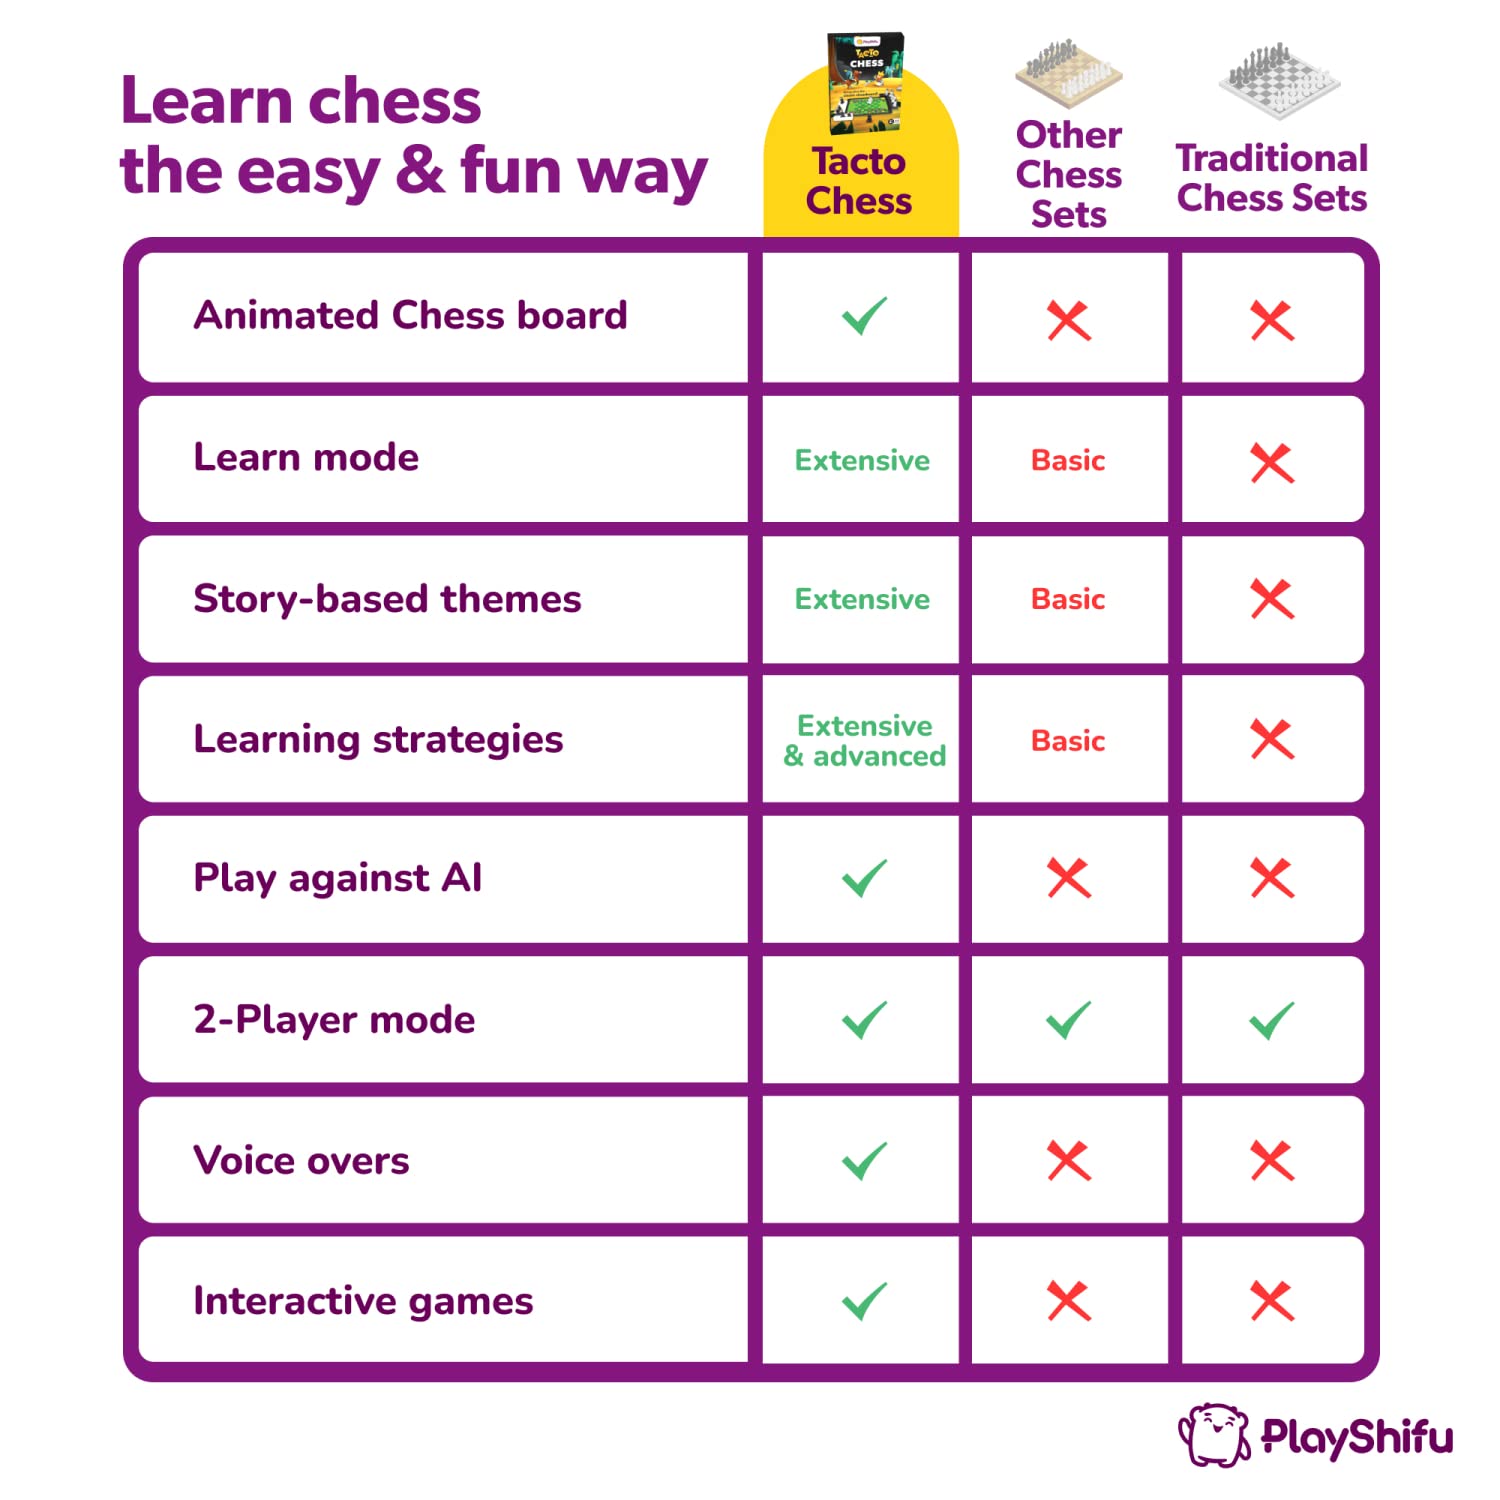 PlayShifu Tacto Chess - Interactive Chess Board Game for Kids Ages 6 Years & Up (Tablet Not Included)